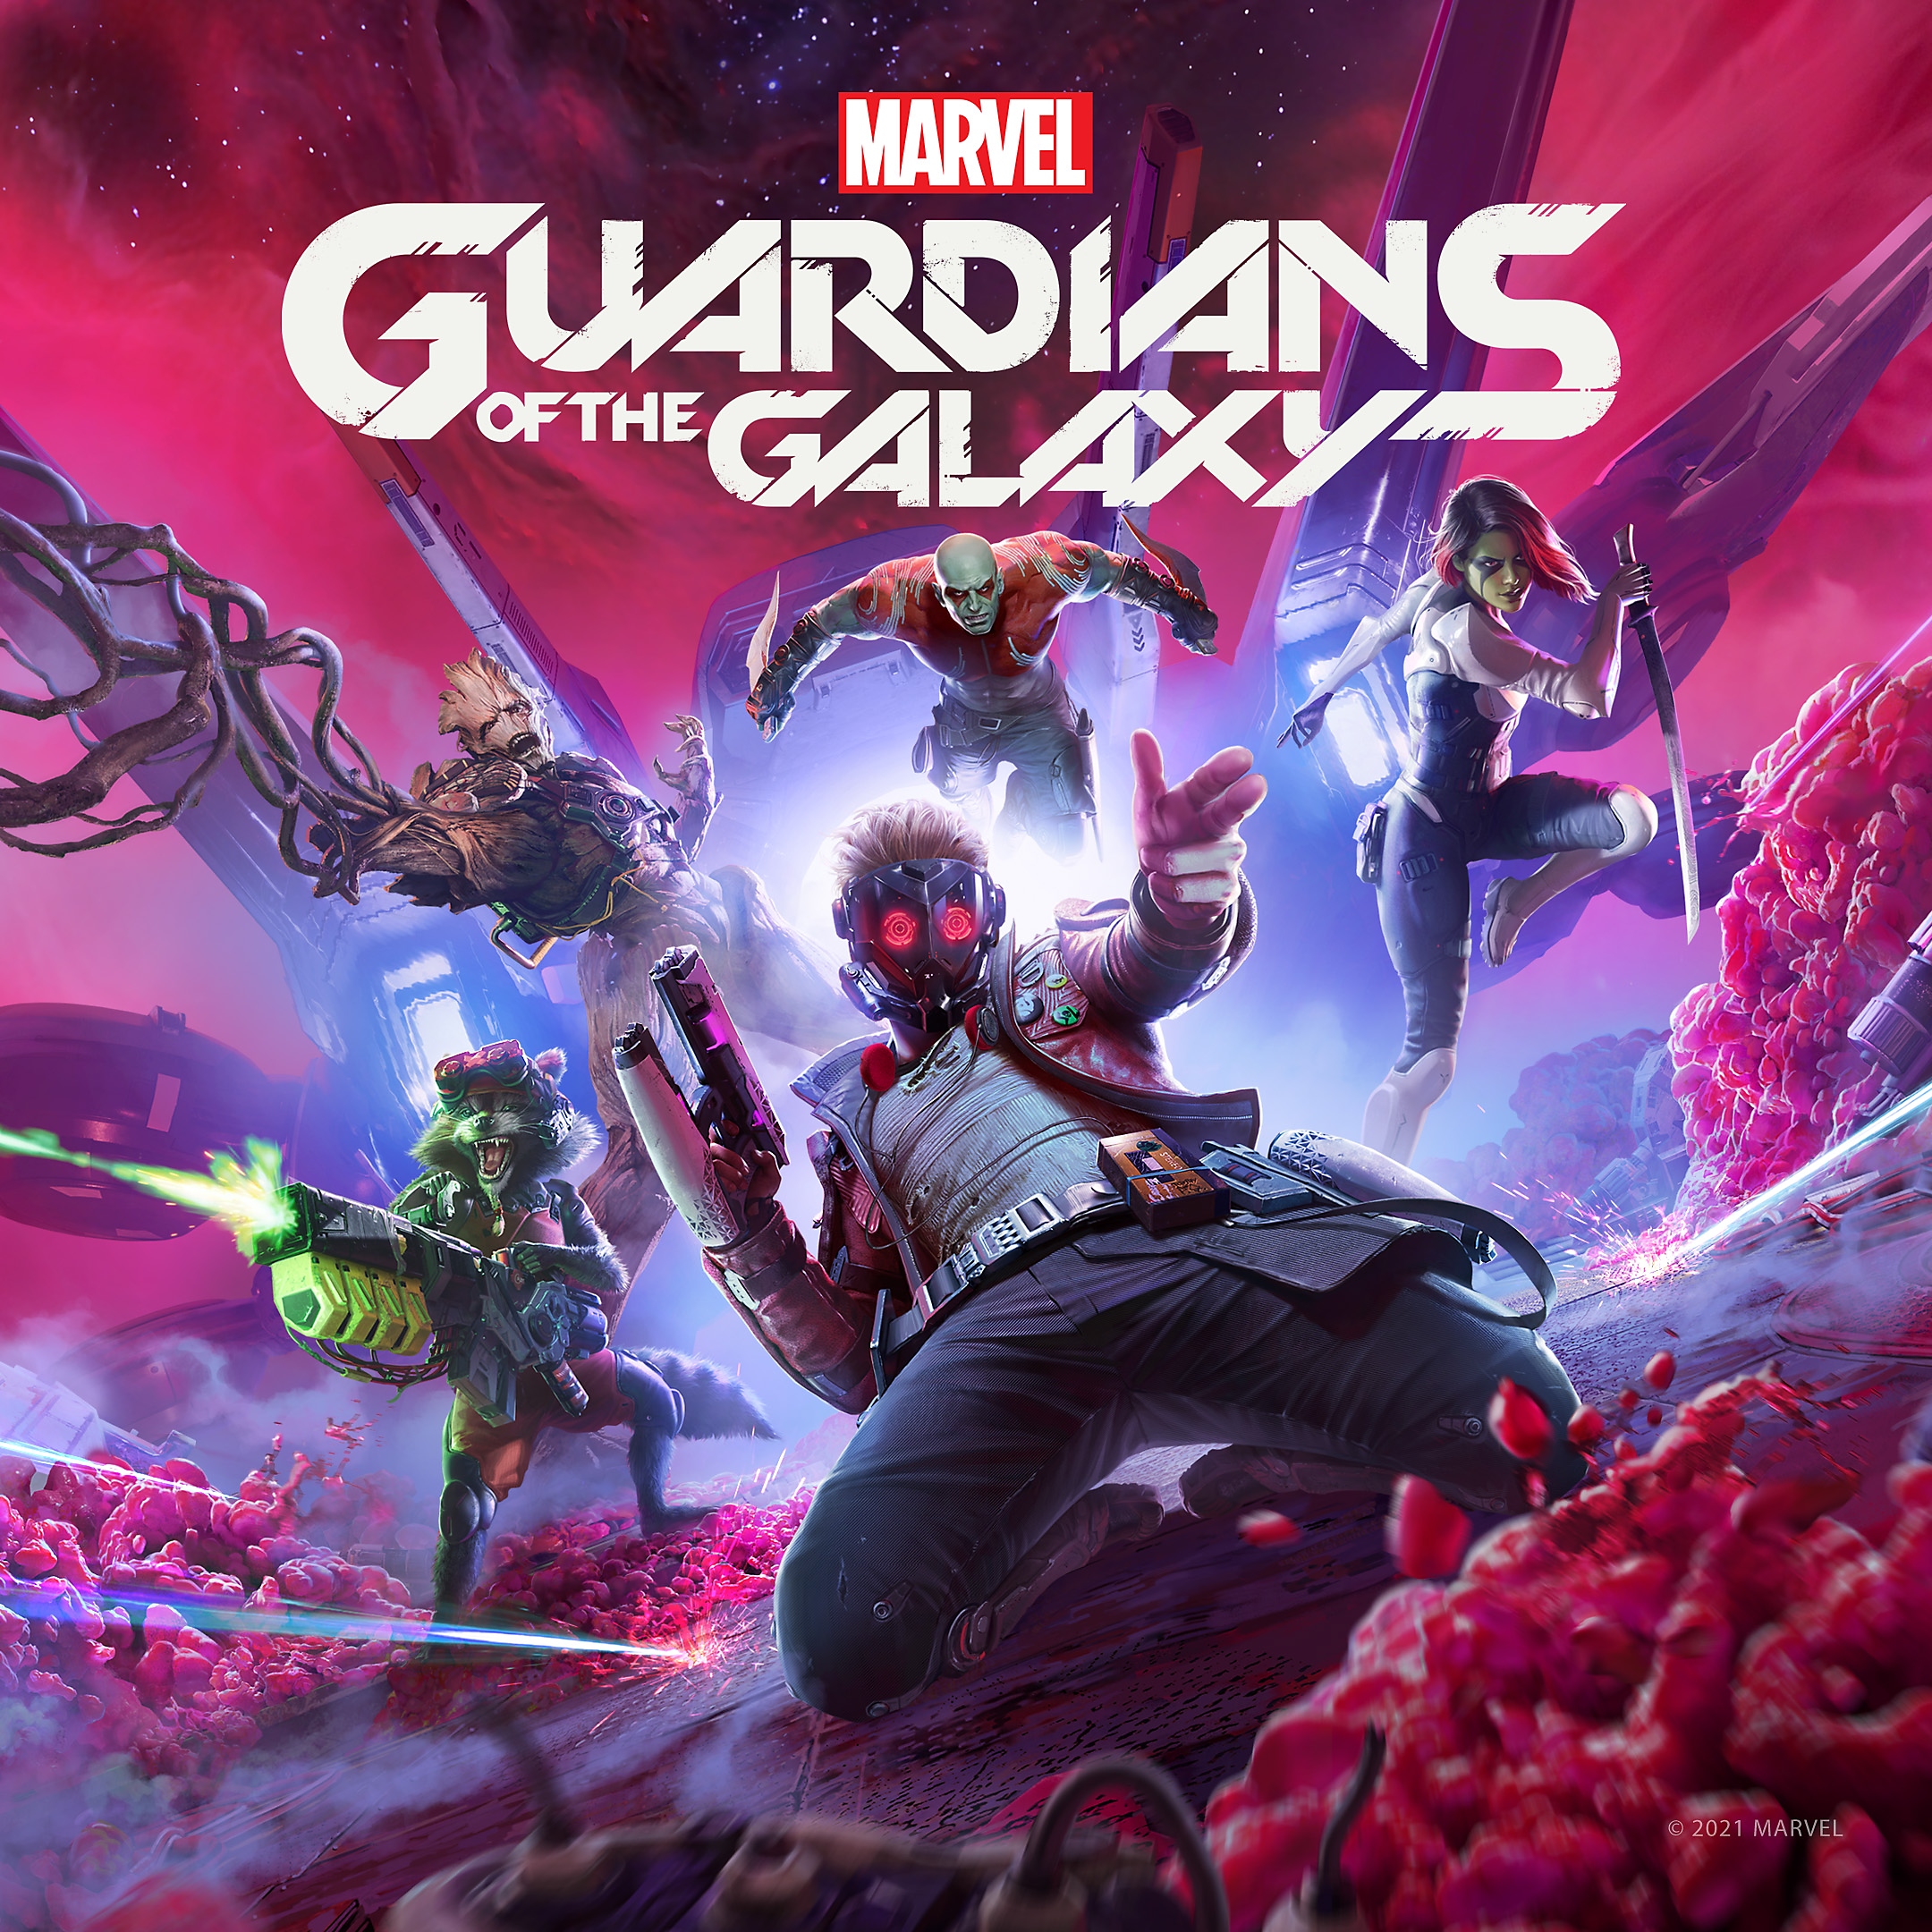 『Marvel's Guardians of the Galaxy』のアートワーク